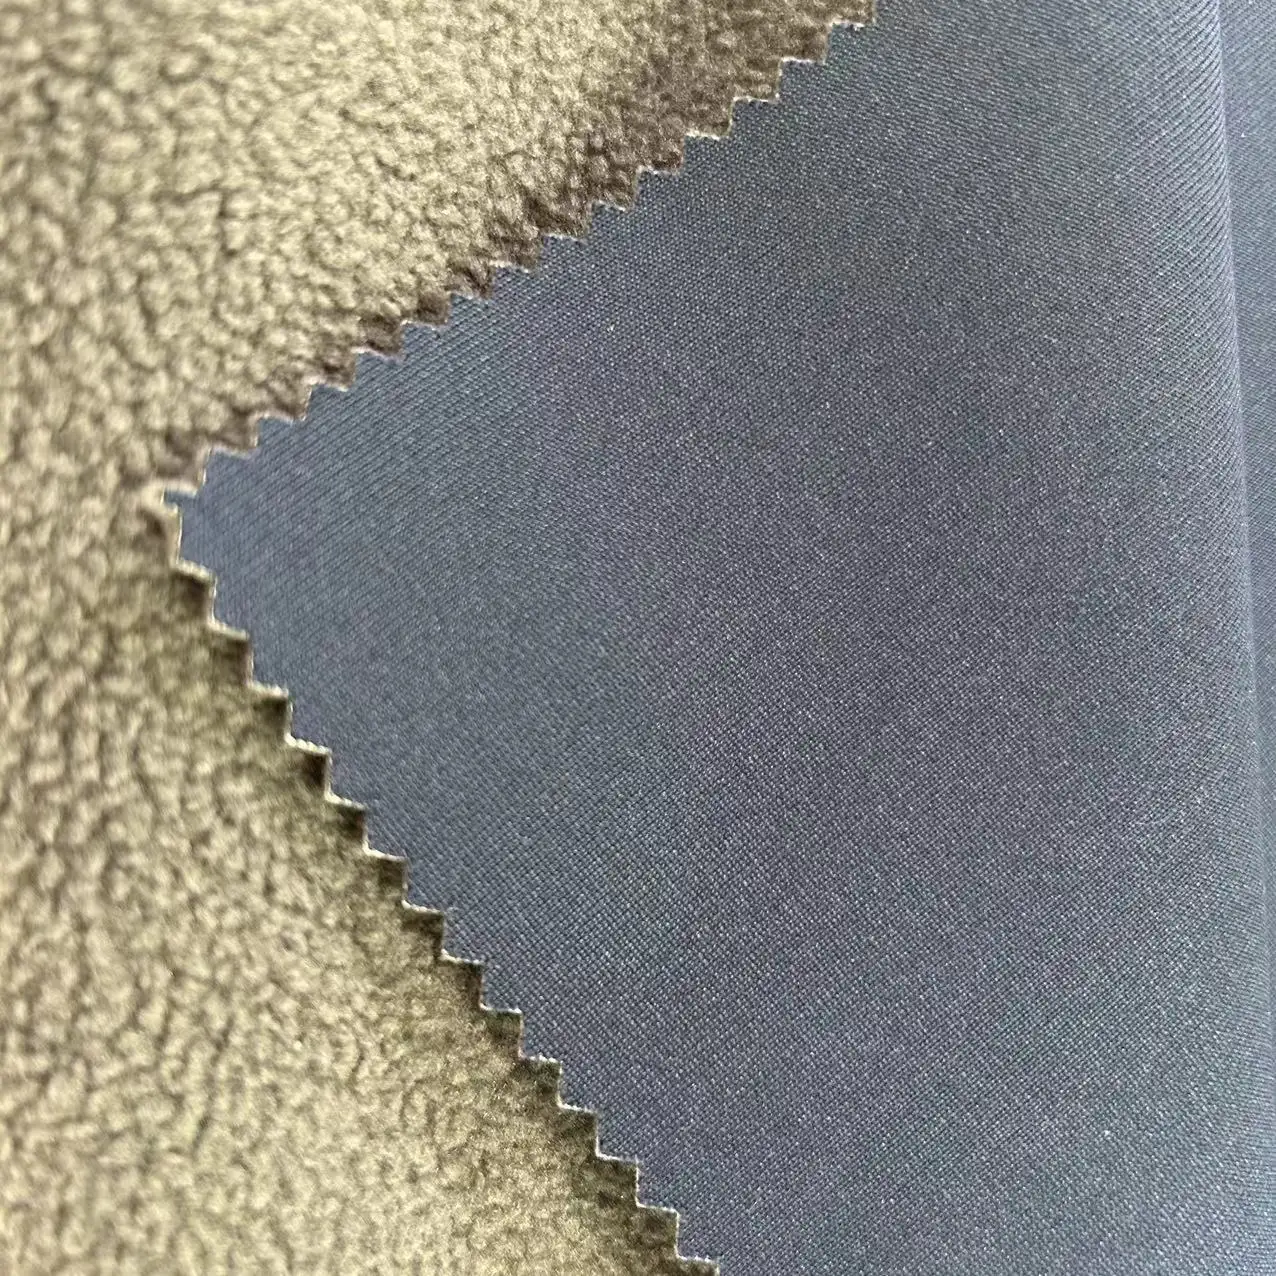 Wholesale Hot Sale 100% Polyester Waterproof and Breathable Fleece Fabric for Winter Garments&Warm Home Textiles